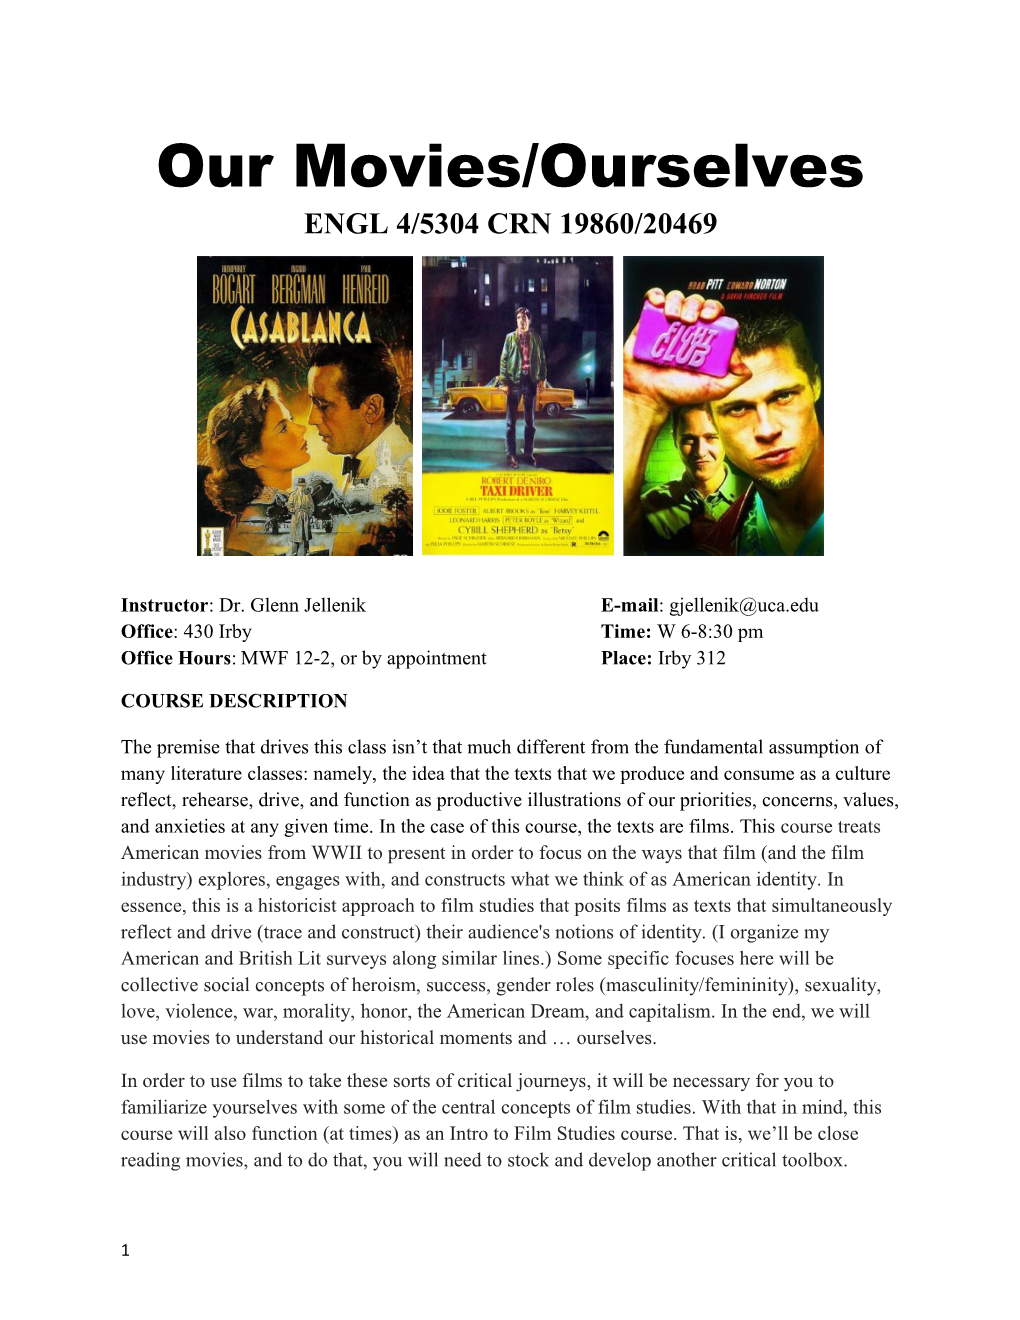 Our Movies/Ourselves